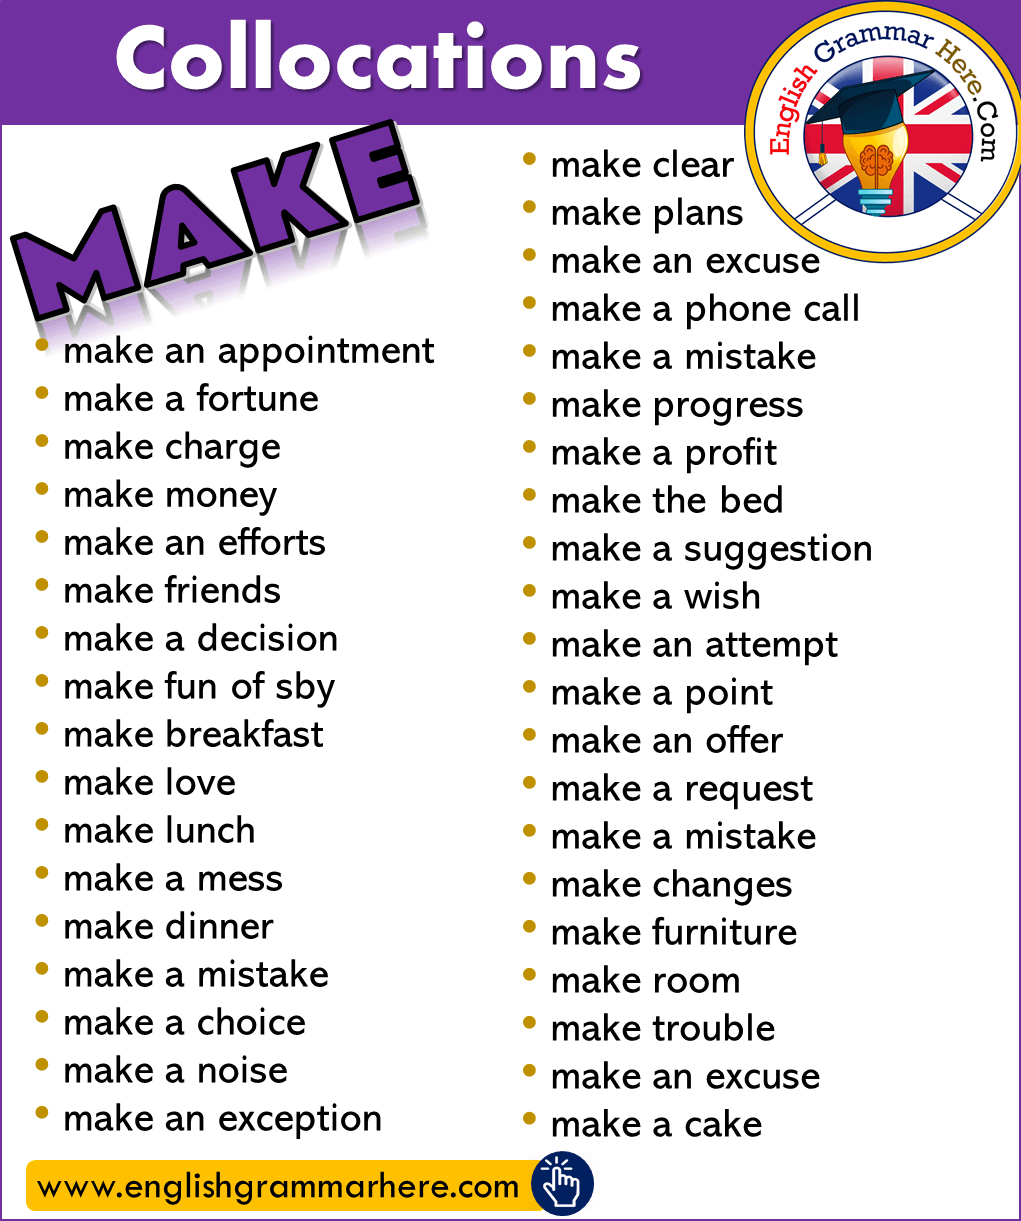 Collocations with MAKE in English